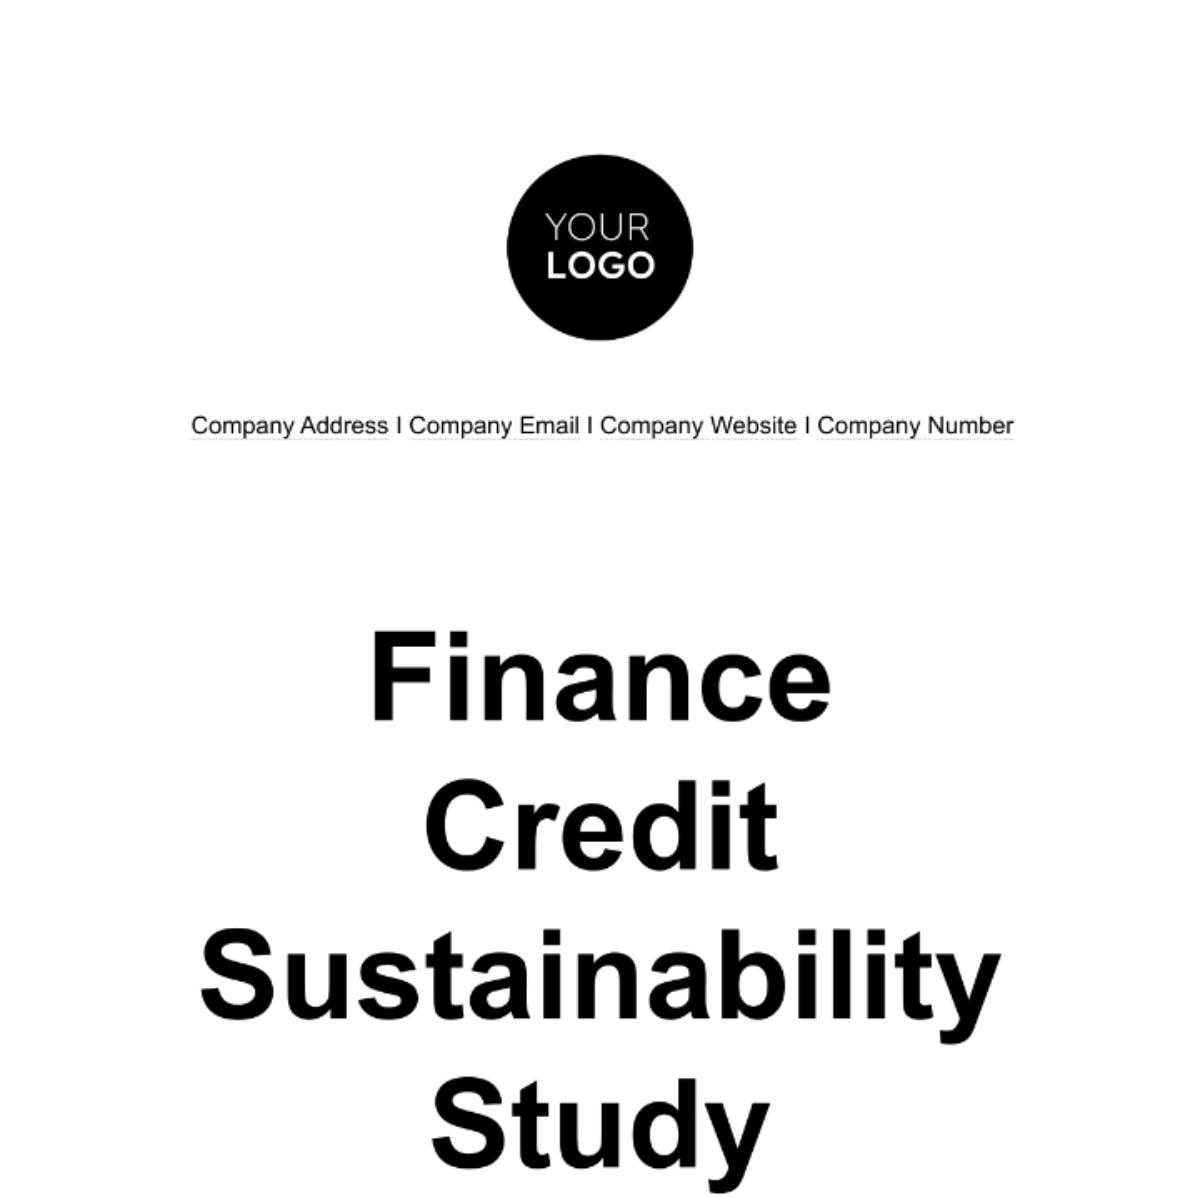 Finance Credit Sustainability Study Template